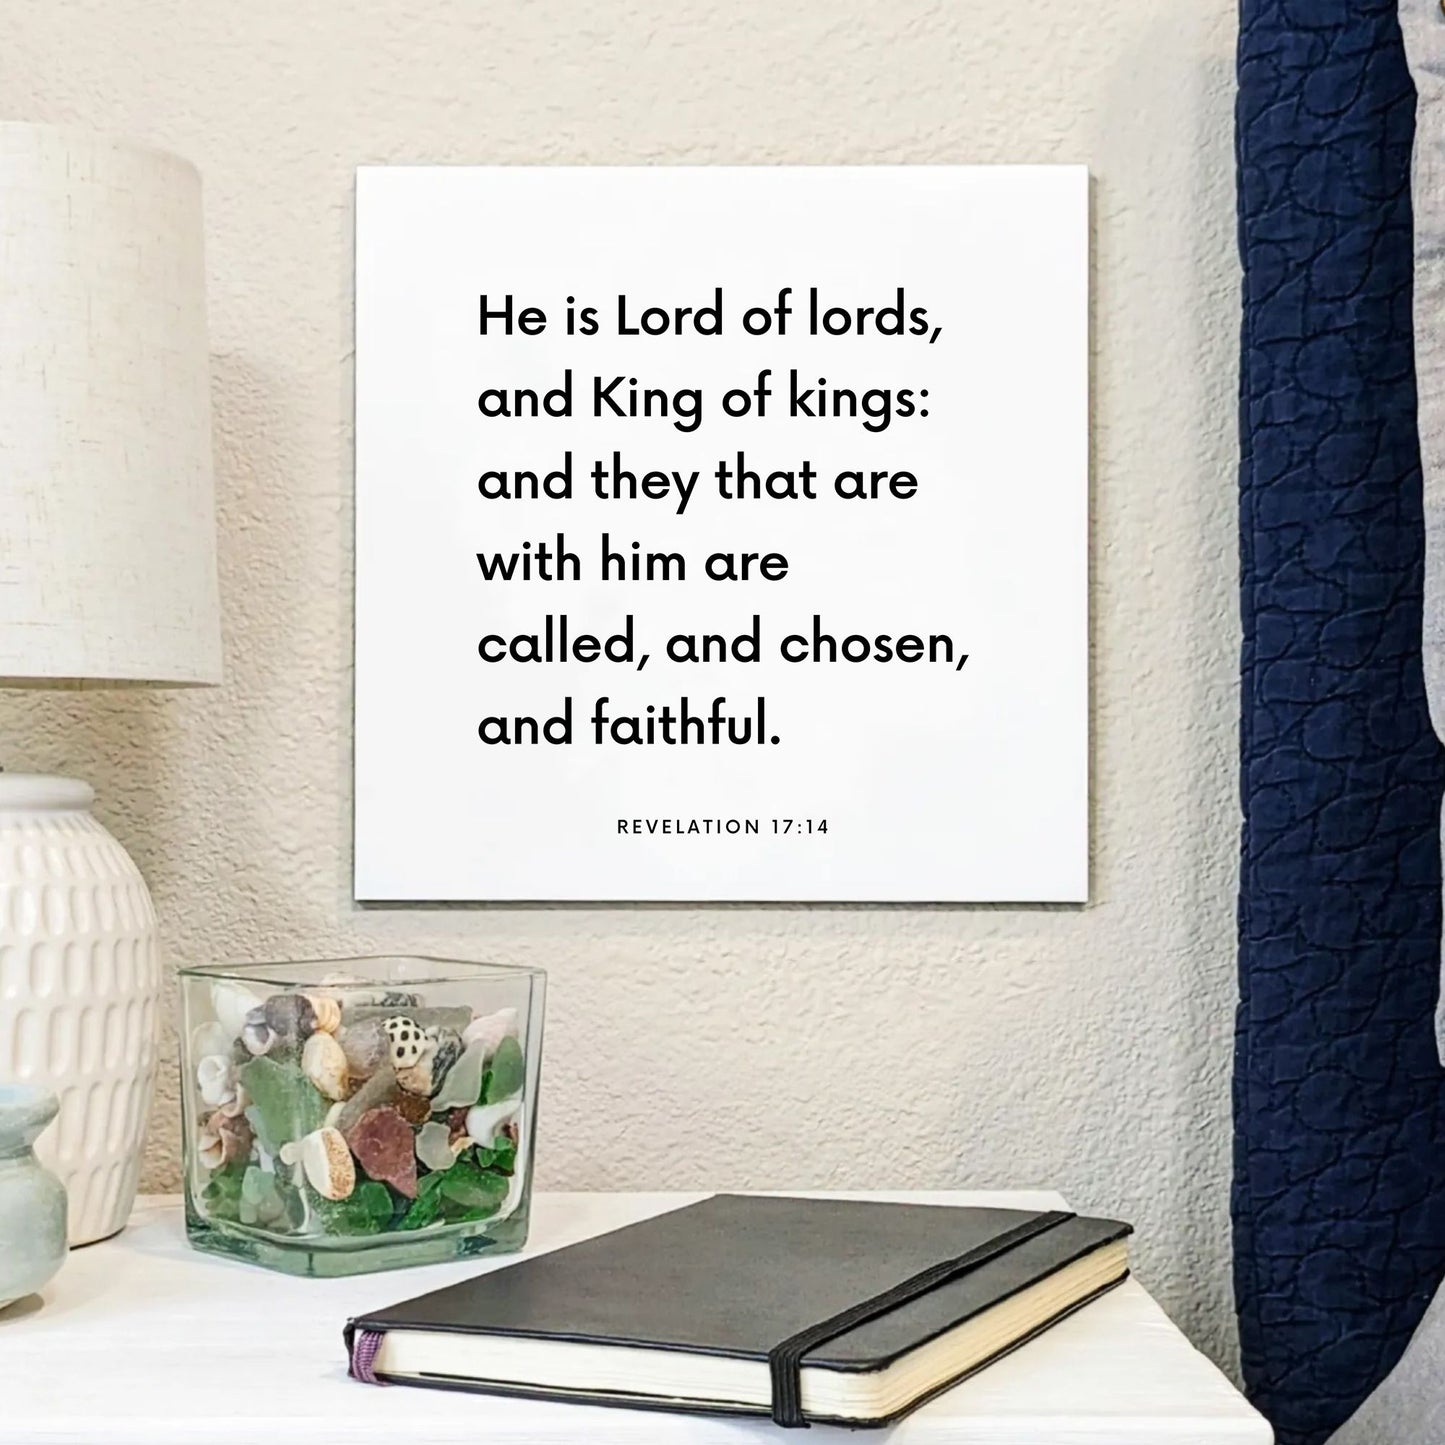 Bedside mouting of the scripture tile for Revelation 17:14 - "He is Lord of lords, and King of kings"